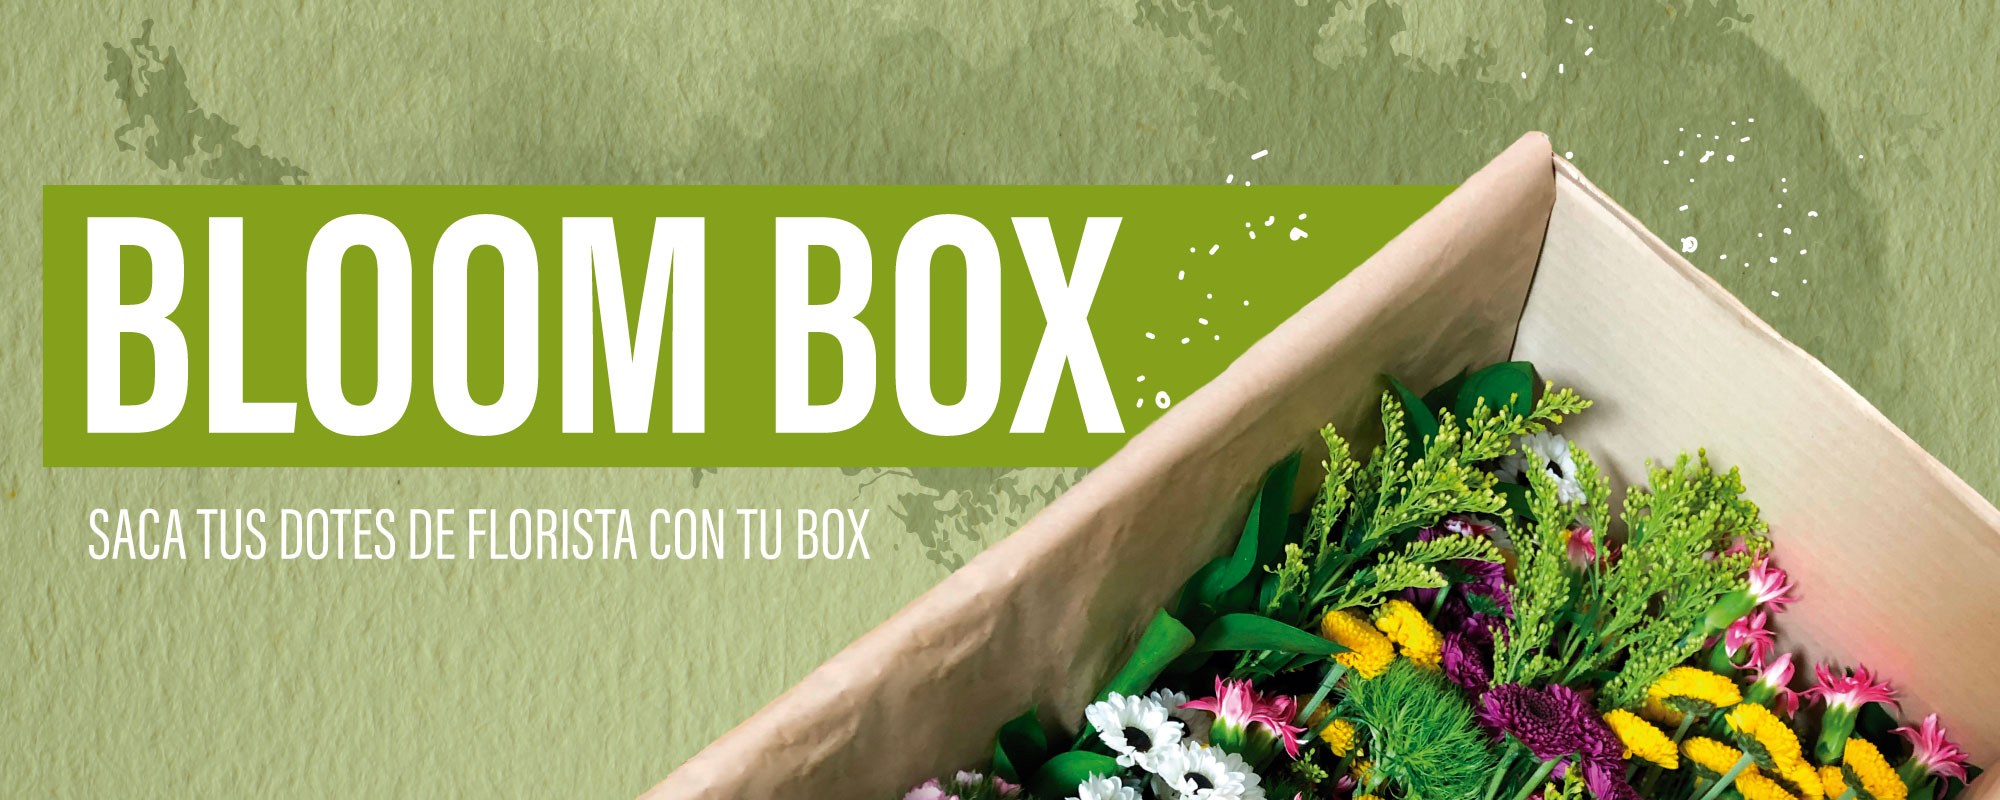 bloombox.home